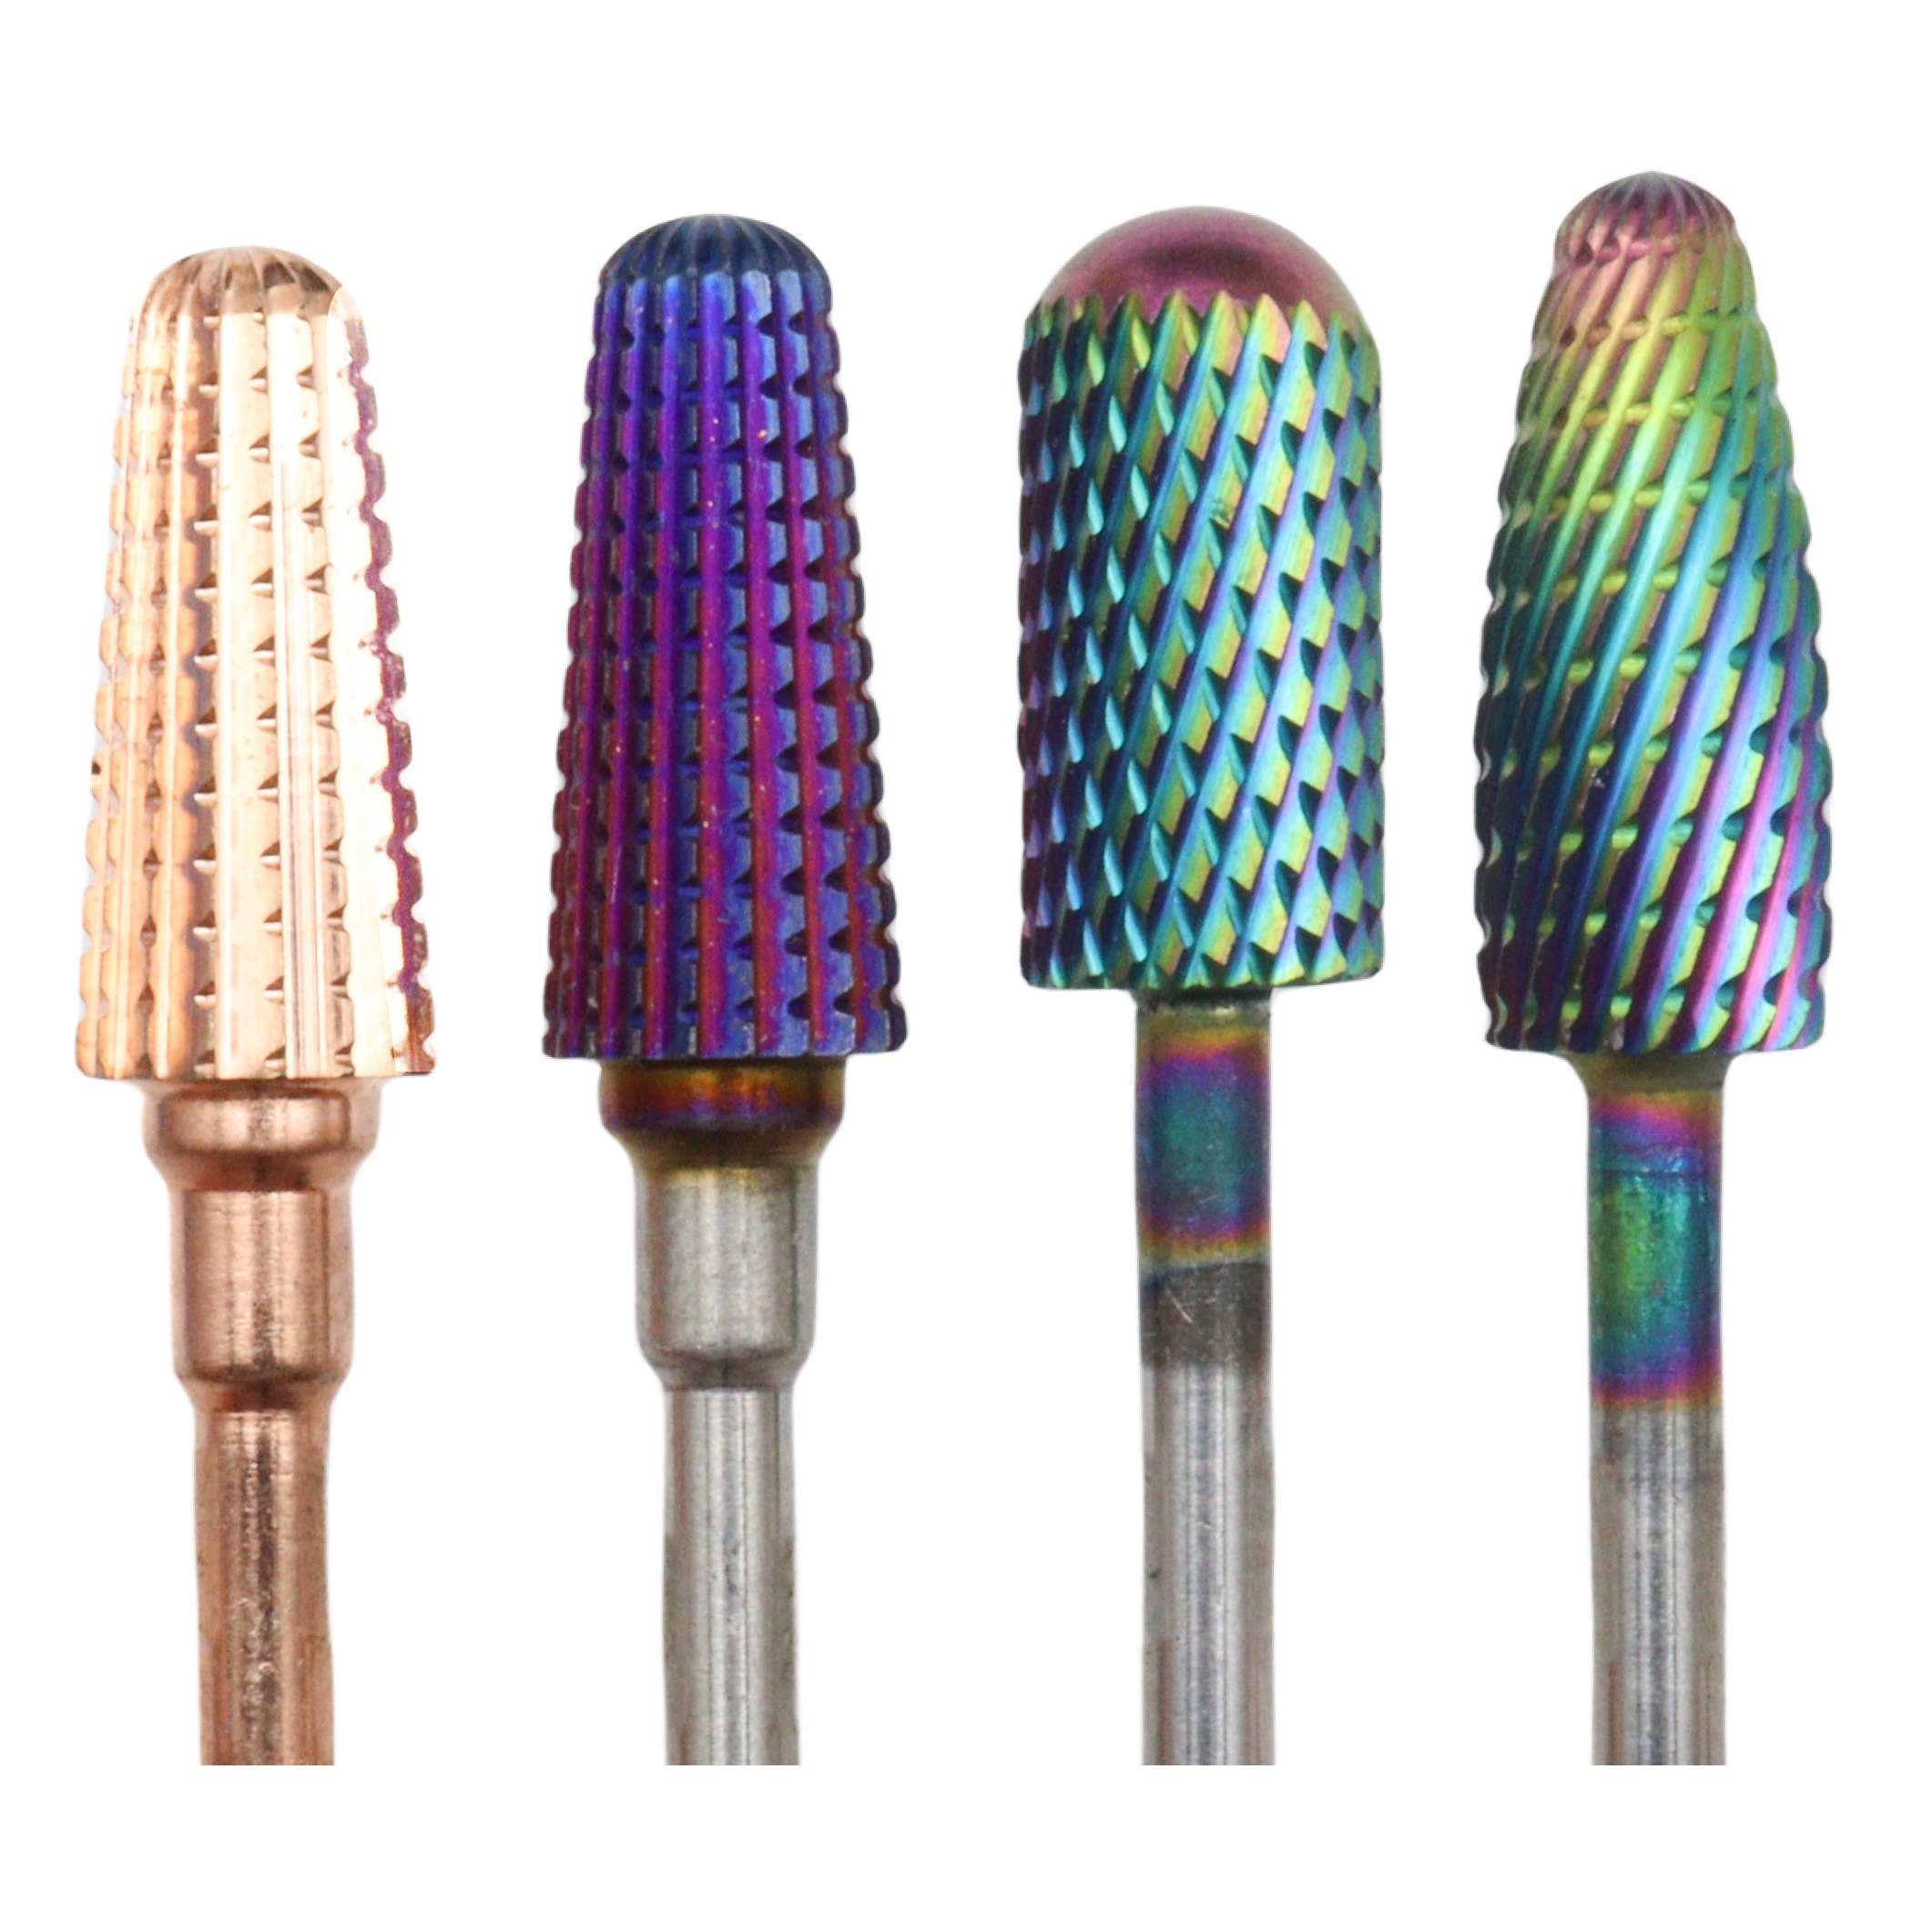 

Carbide Nail Drill Bits Set, Multicolor, For Acrylic Gel Nail Removal, Cuticle Work, Manicure & Pedicure, Ideal Gift For Mother's Day